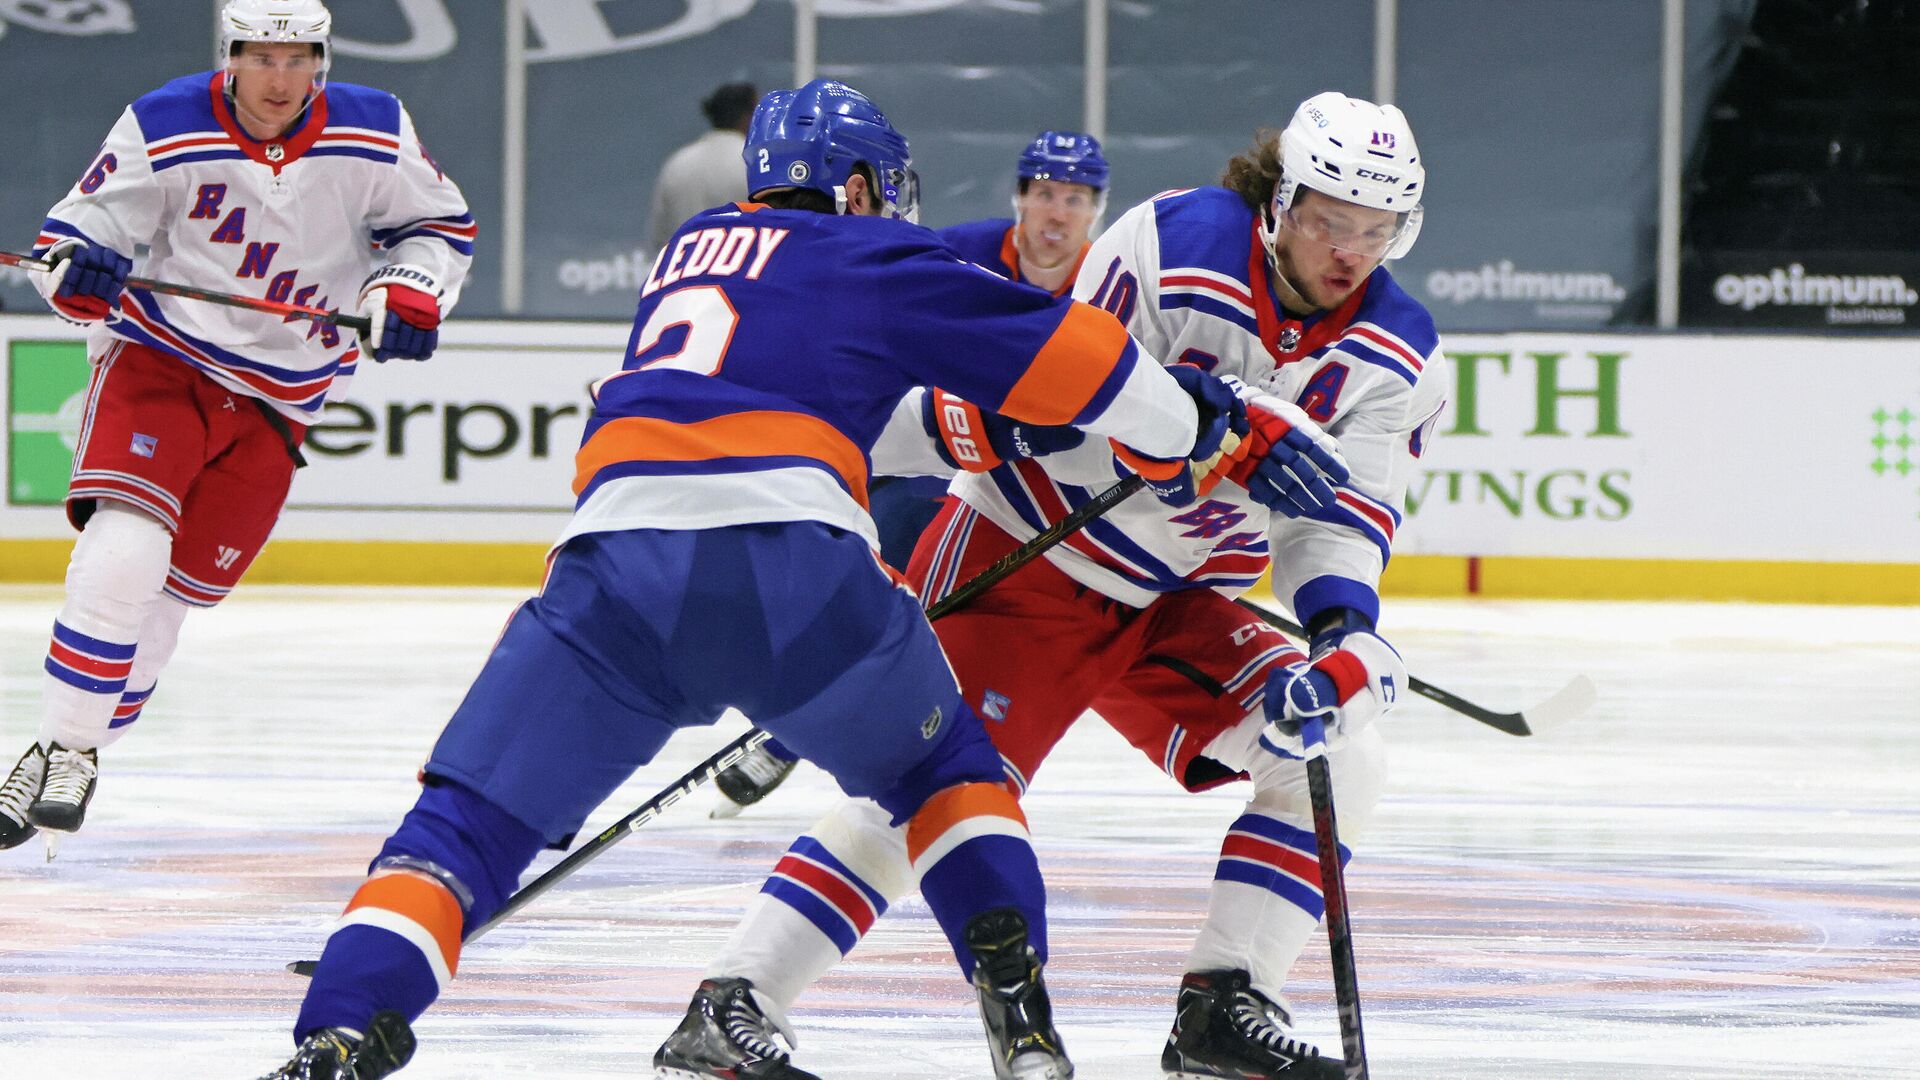 UNIONDALE, NEW YORK - APRIL 09: Artemi Panarin #10 of the New York Rangers carries the puck in on Nick Leddy #2 of the New York Islanders at Nassau Coliseum on April 09, 2021 in Uniondale, New York.   Bruce Bennett/Getty Images/AFP (Photo by BRUCE BENNETT / GETTY IMAGES NORTH AMERICA / Getty Images via AFP) - РИА Новости, 1920, 10.04.2021